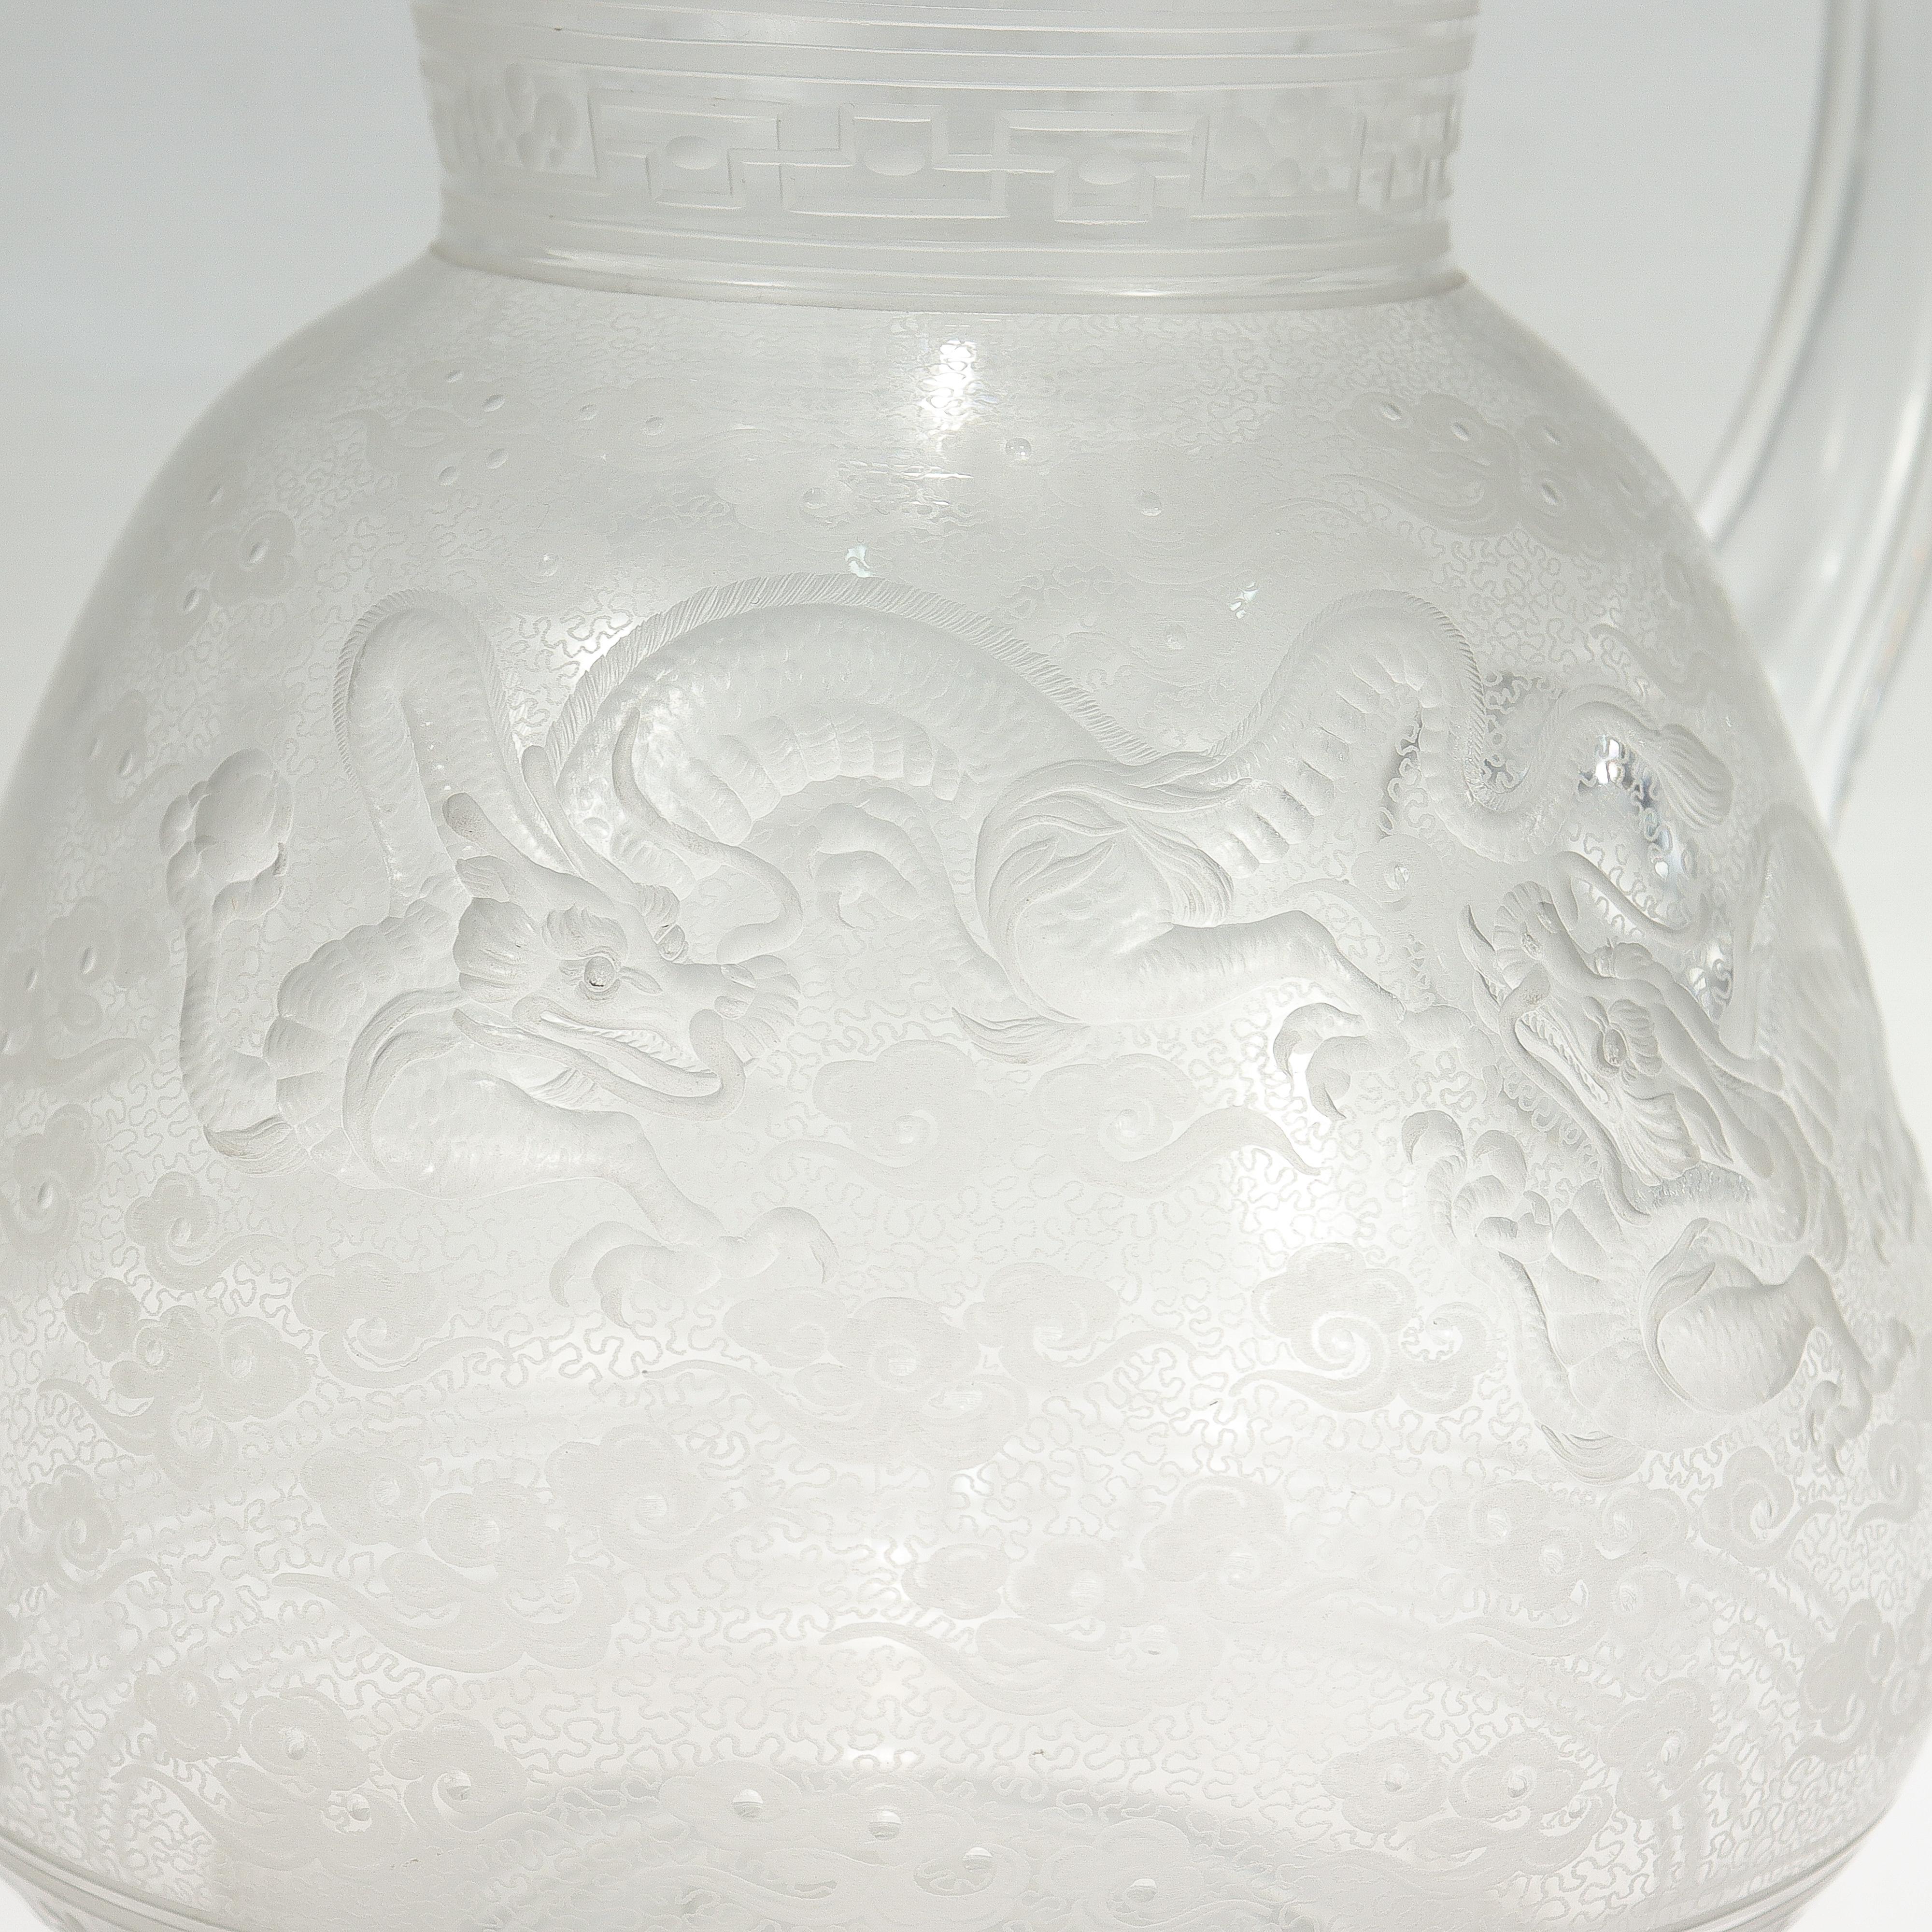 Antique Kny Attributed Stourbridge Engraved Glass Pitcher with Chinese Dragons For Sale 2